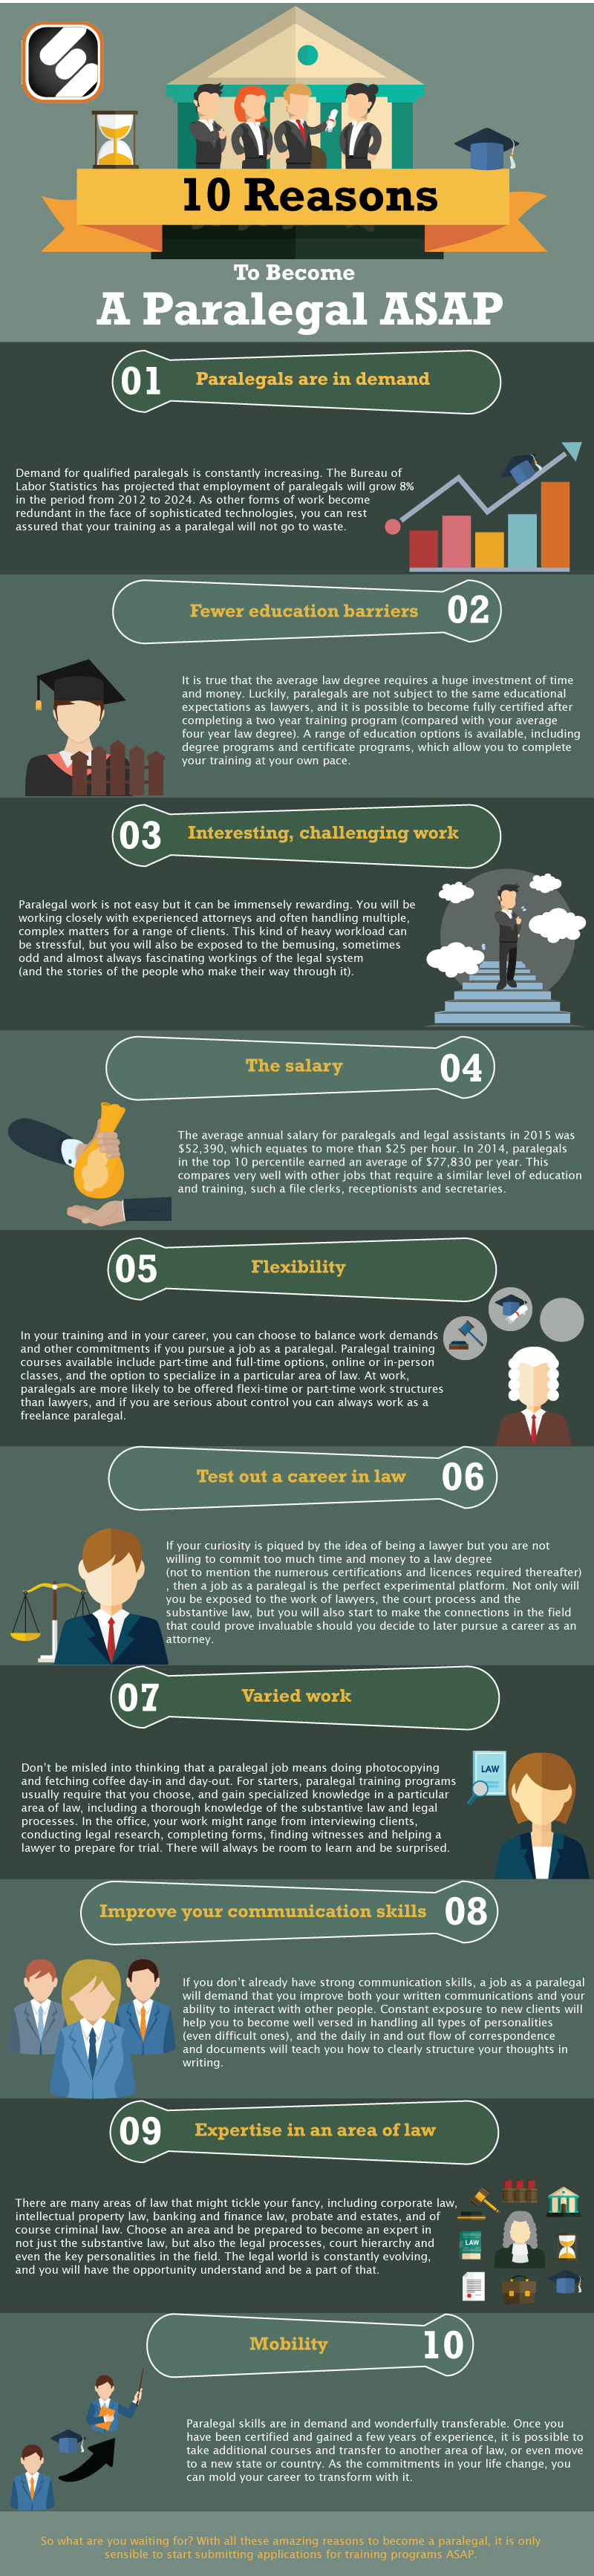 10 Reasons To Become A Paralegal ASAP